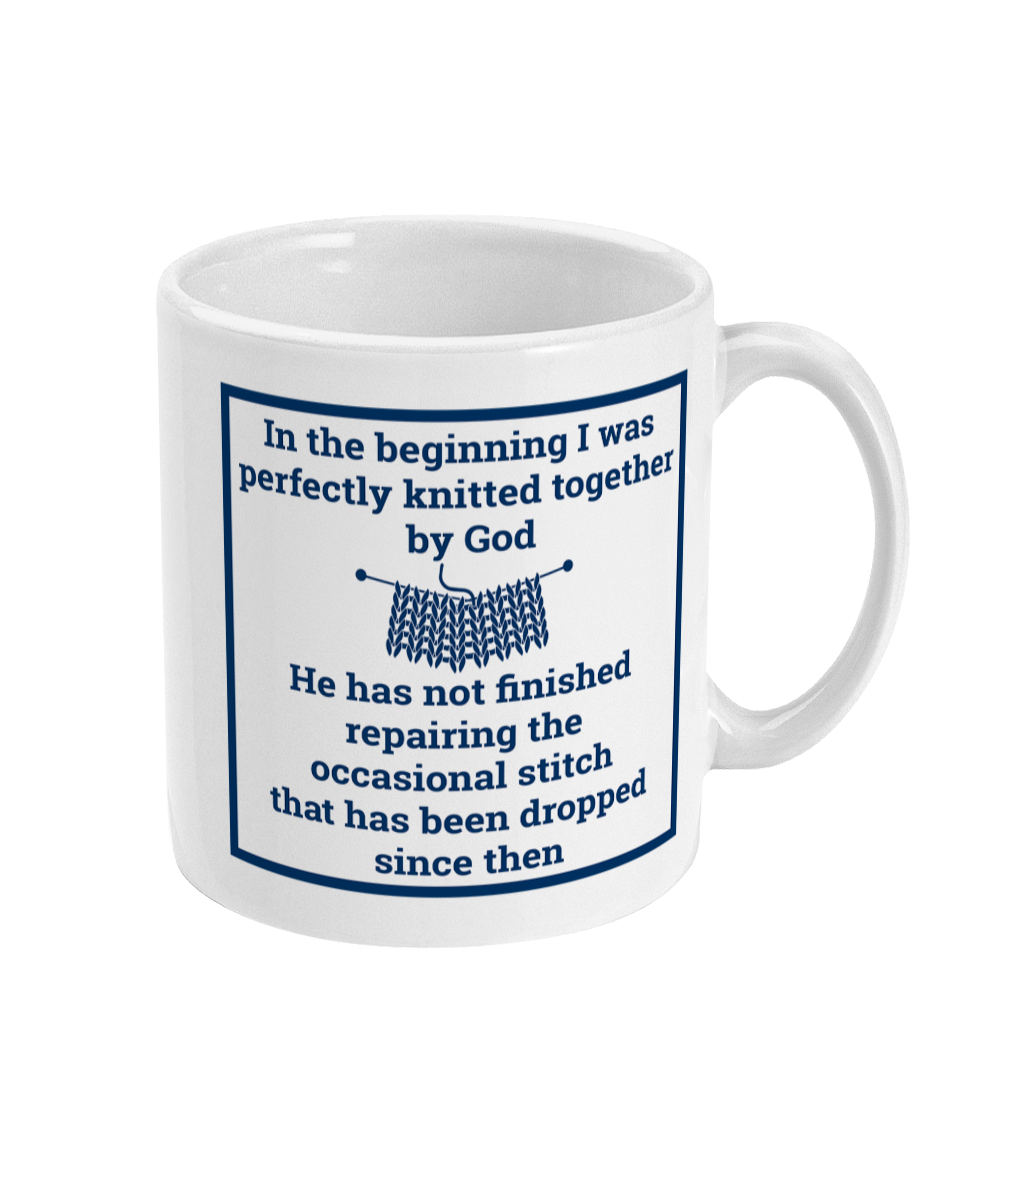 mug with in the beginning I was perfectly knitted together by God